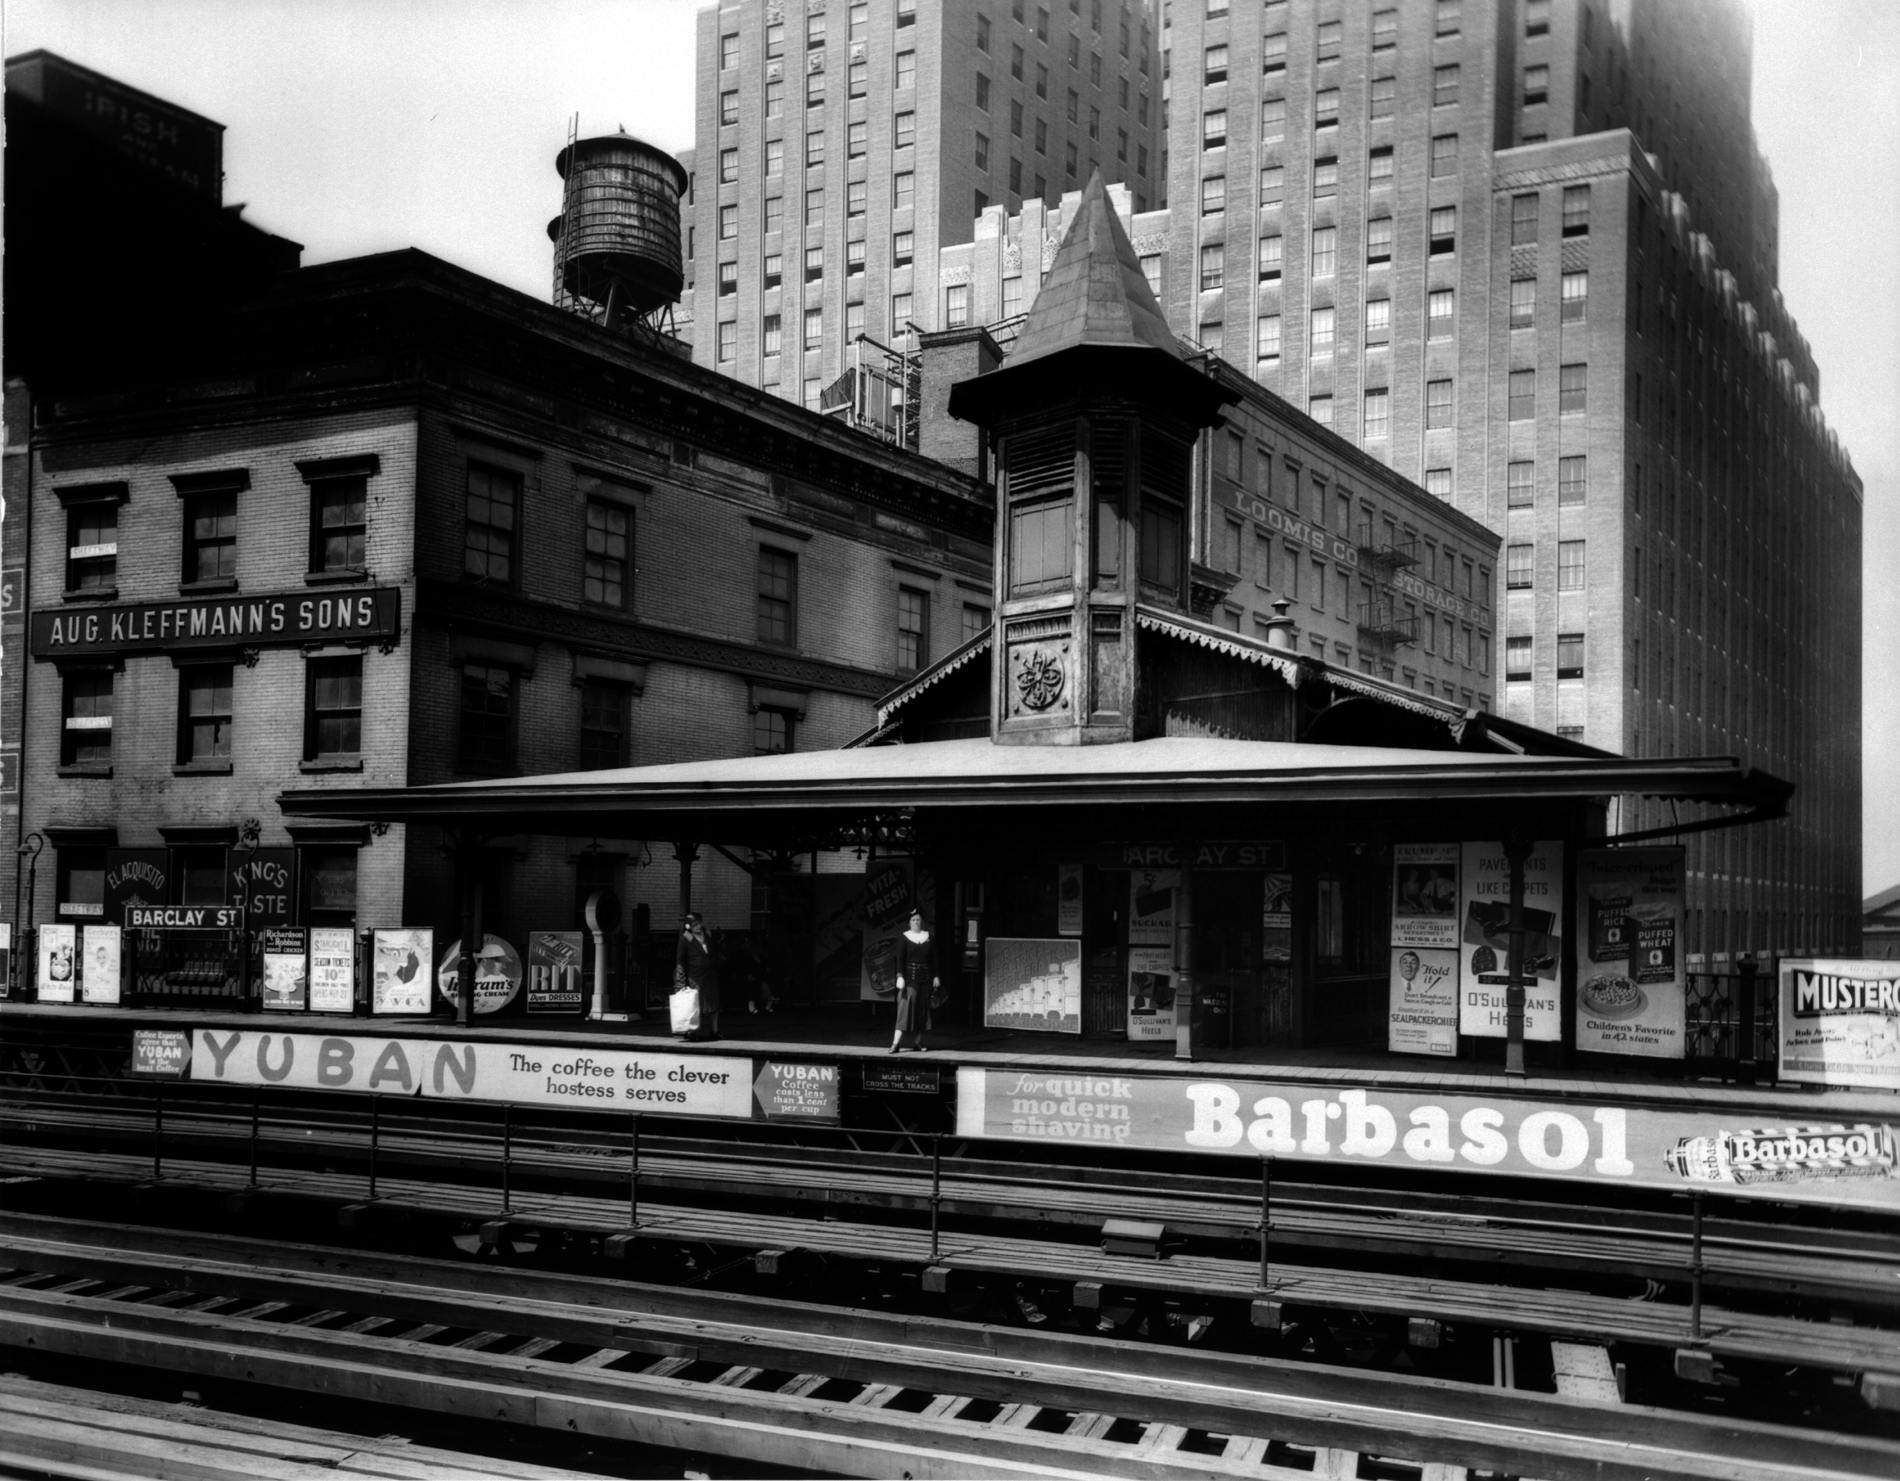 Barclay Street Elevated Station